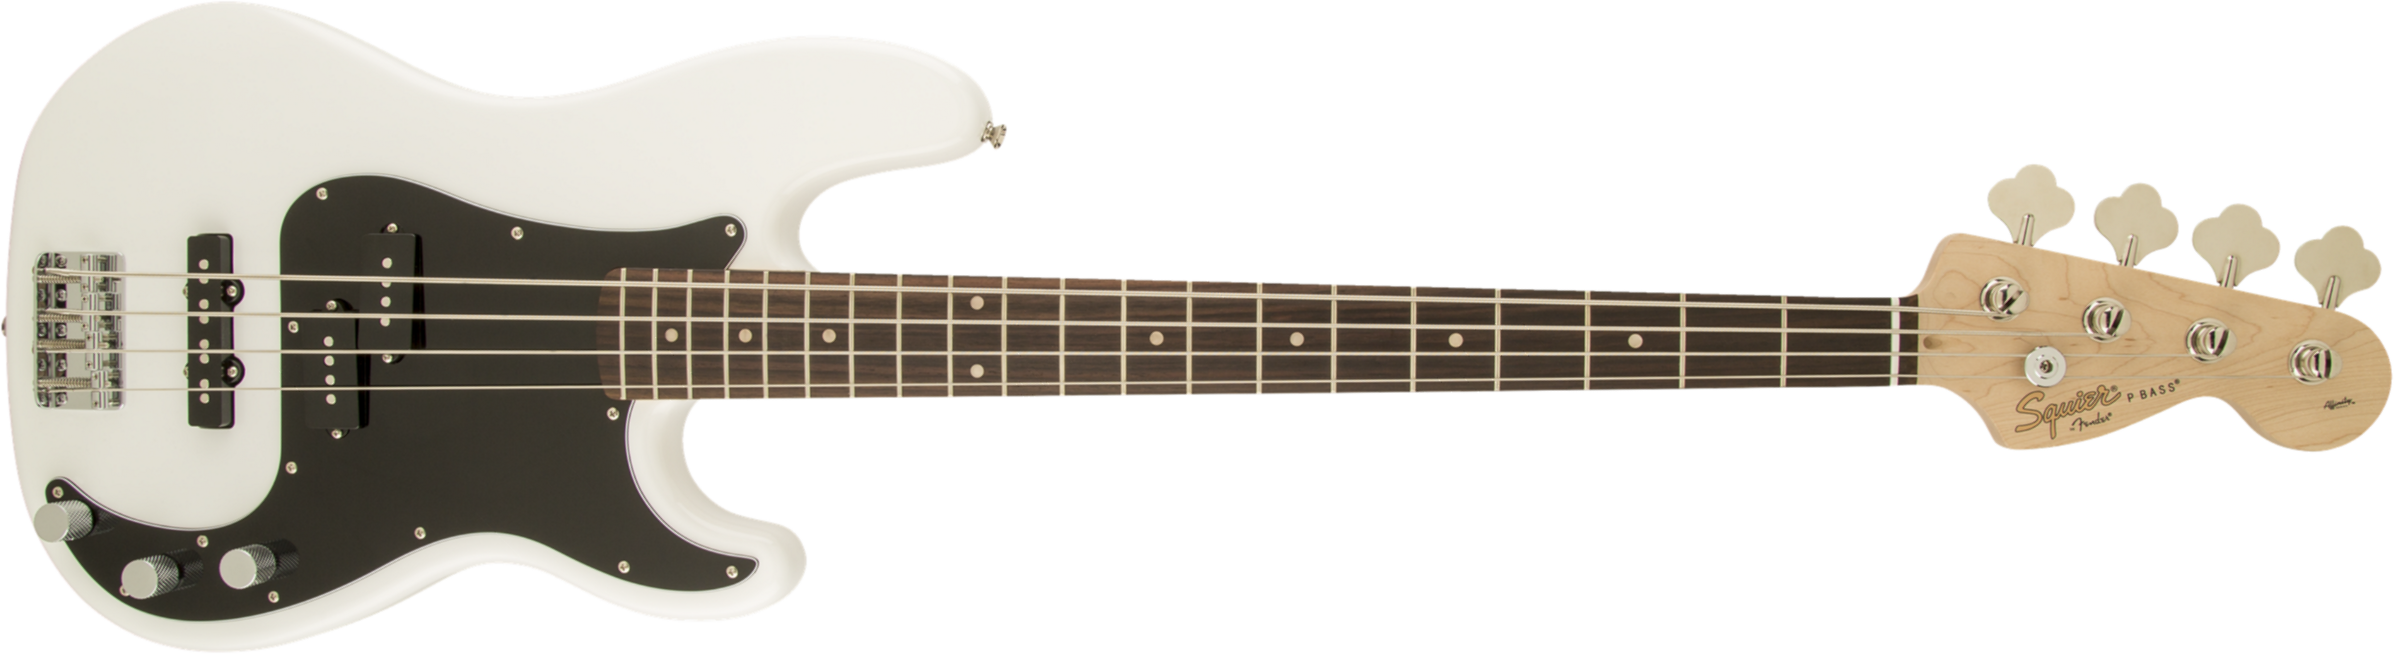 Squier Precision Bass Affinity Series Pj (lau) - Olympic White - Solidbody E-bass - Main picture